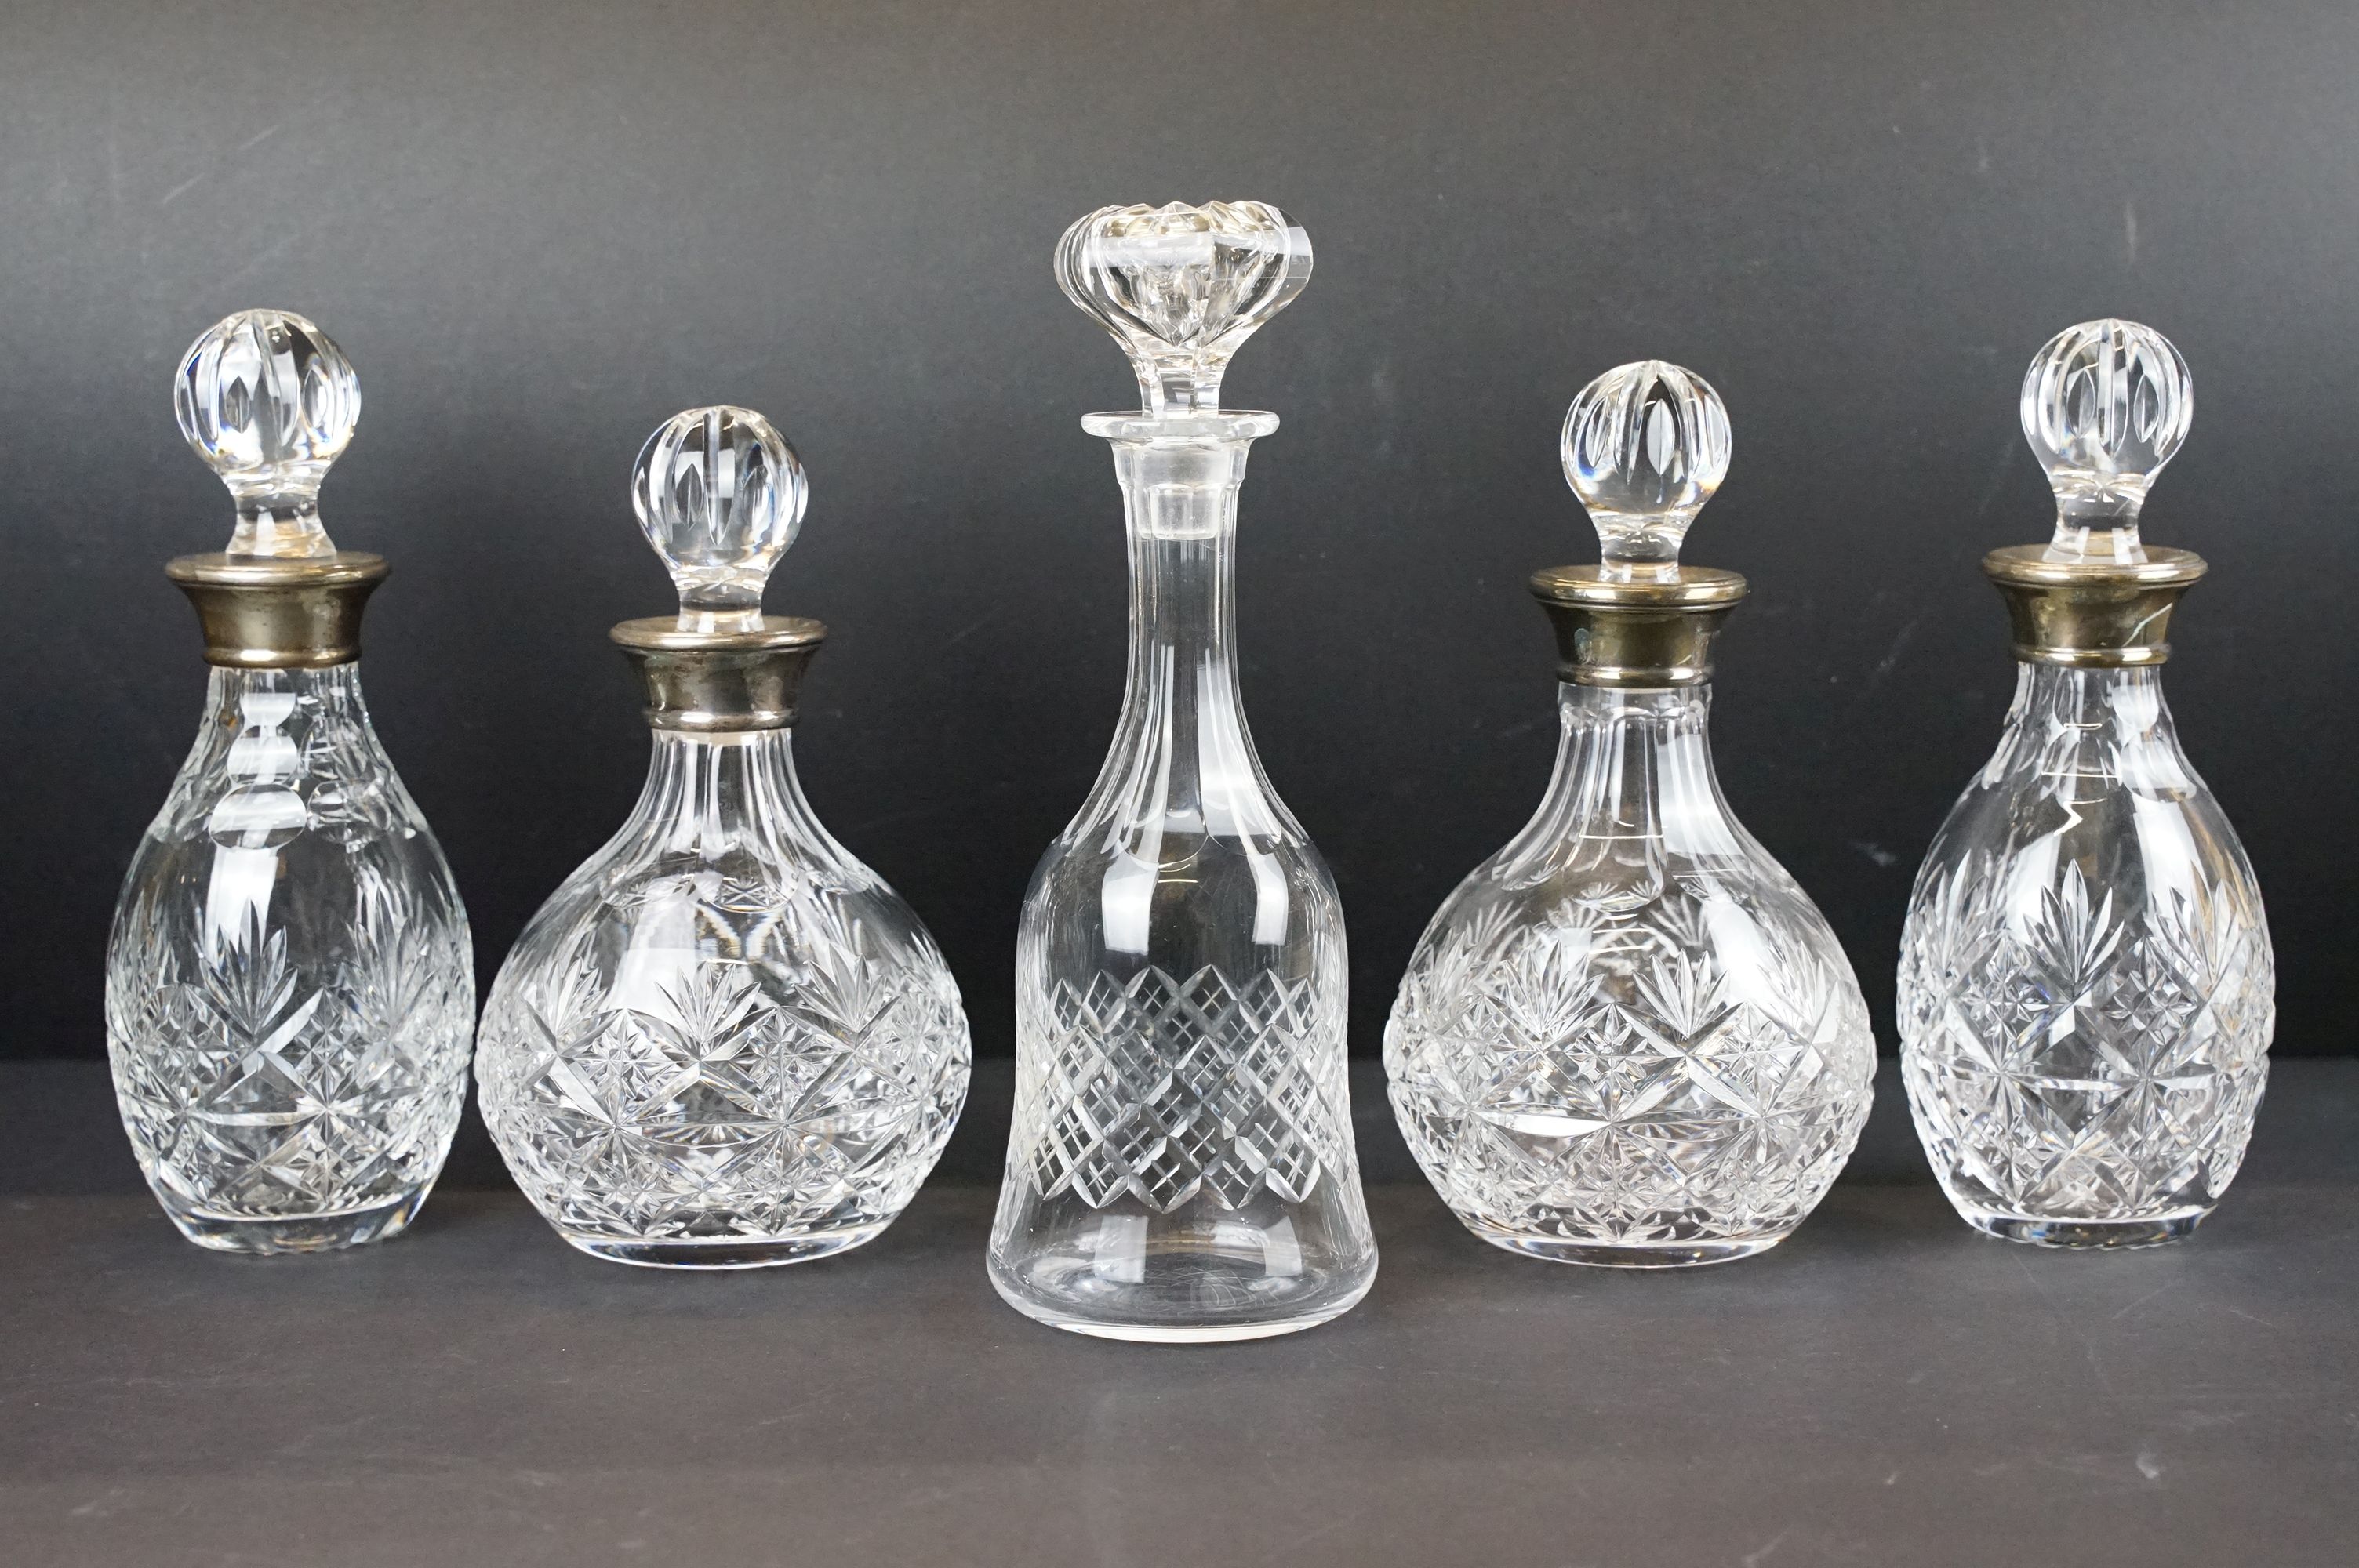 Two pairs of late 20th century cut glass decanters with silver hallmarked collars, circa 1990's (